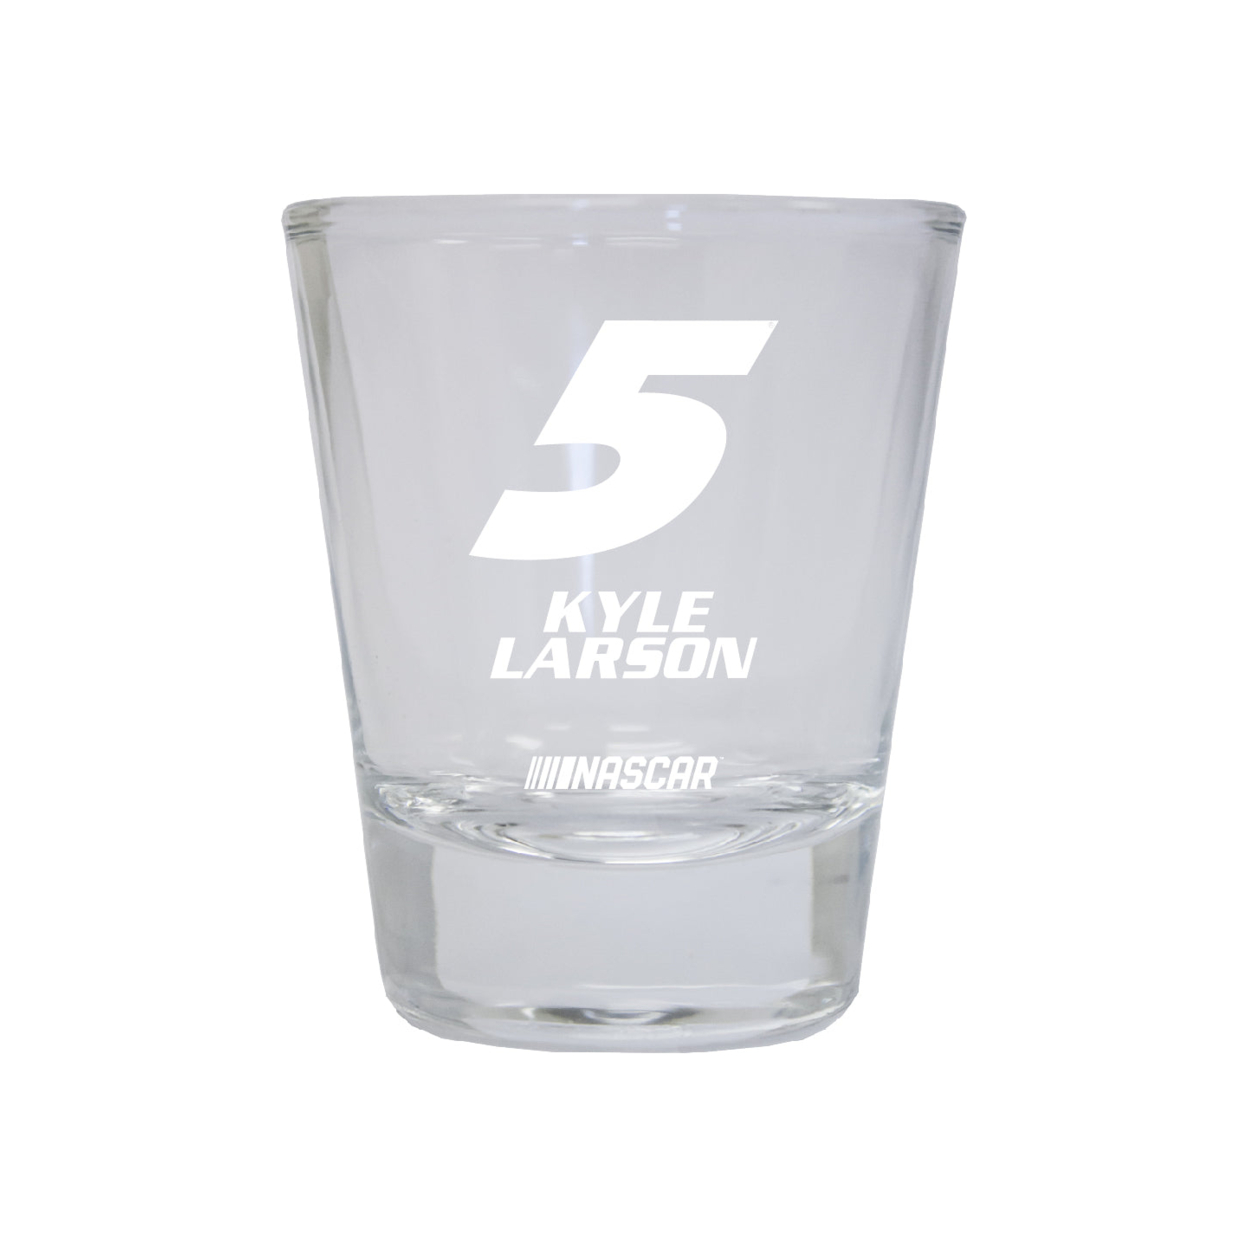 Kyle Larson #5 Nascar Etched Round Shot Glass New For 2022